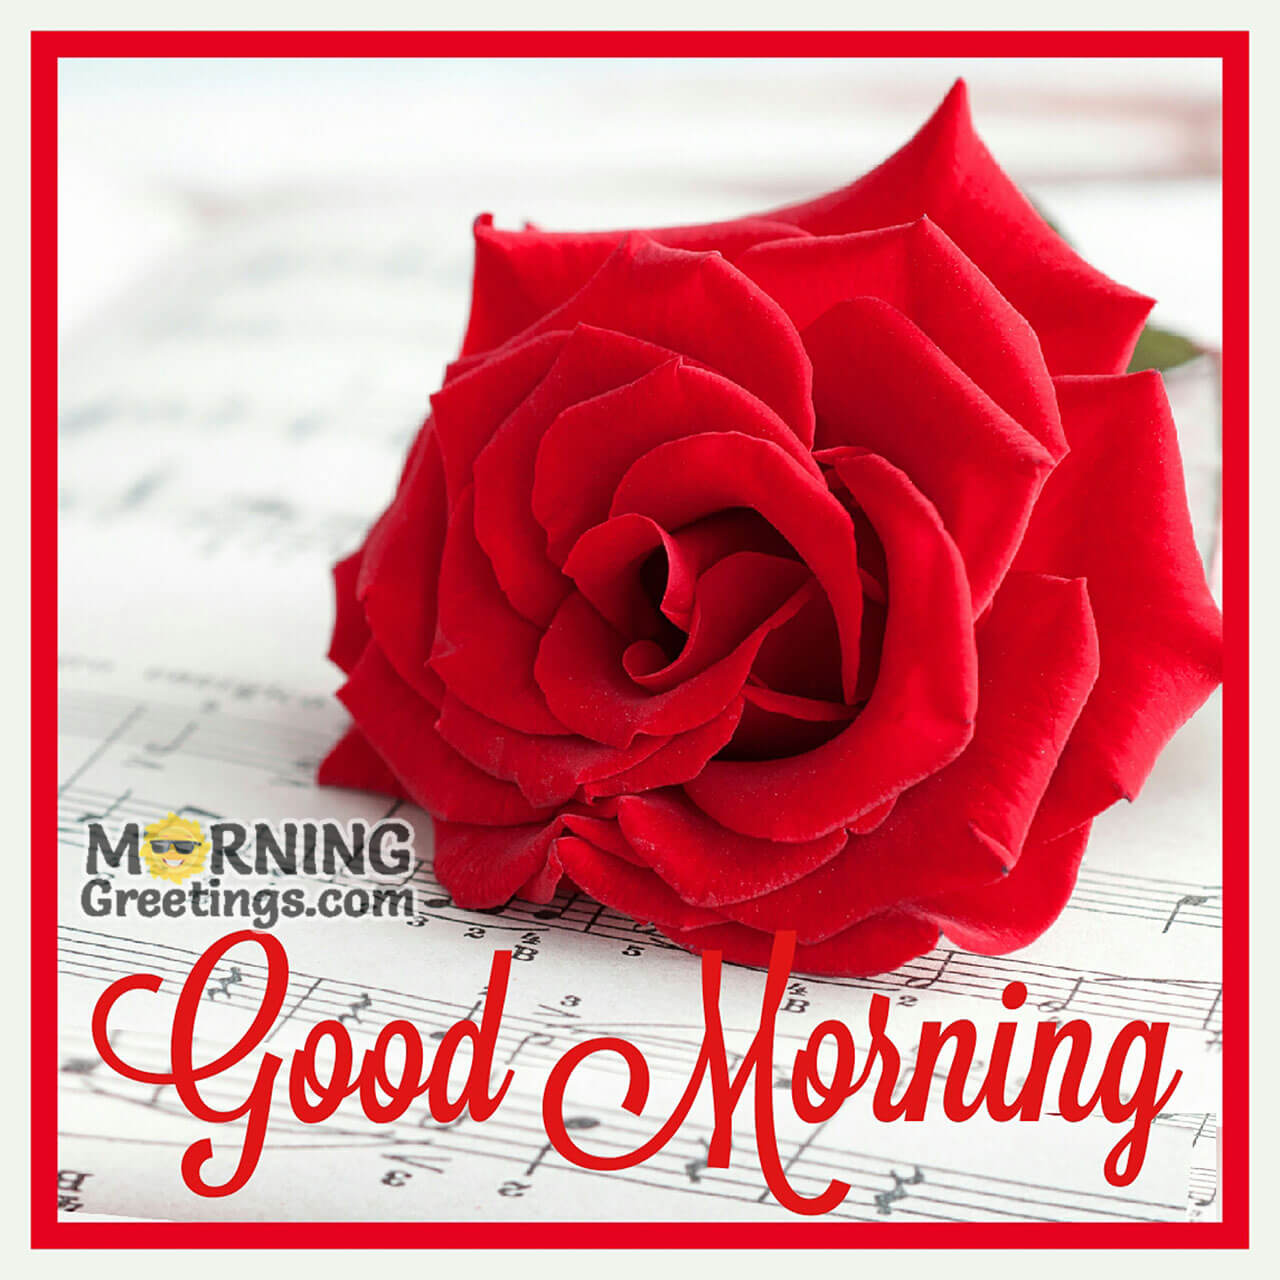 Awe-inspiring Collection of 999+ Good Morning Images with Rose Flowers ...